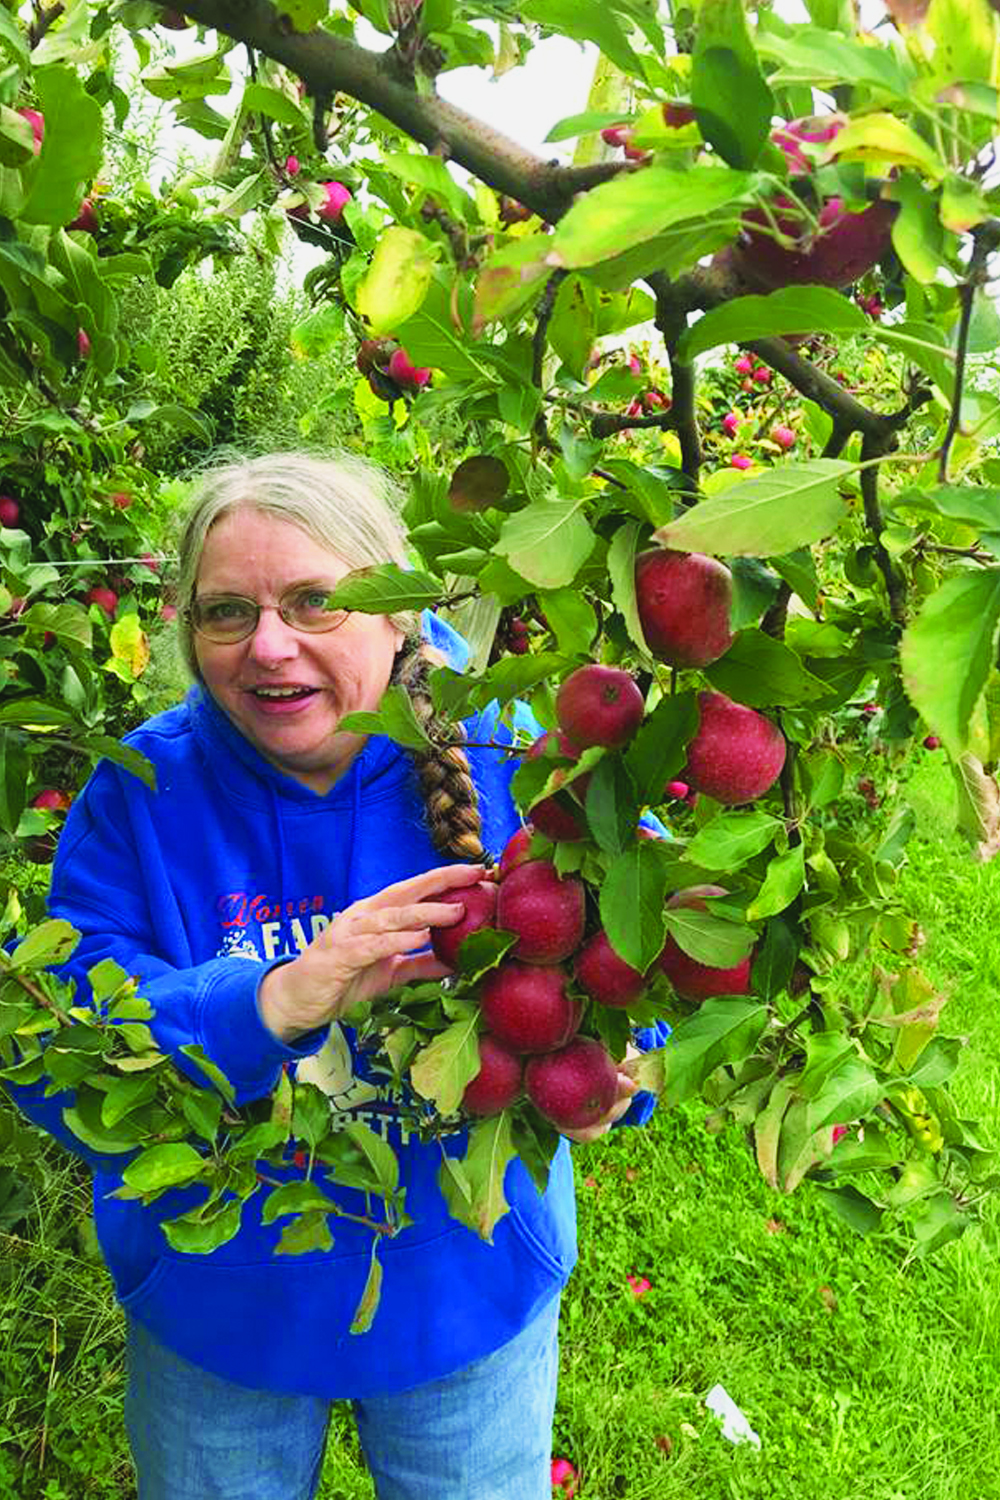 Joyce Pinson of Friends Drift Inn searching for the perfect apples in a Kentucky orchard.